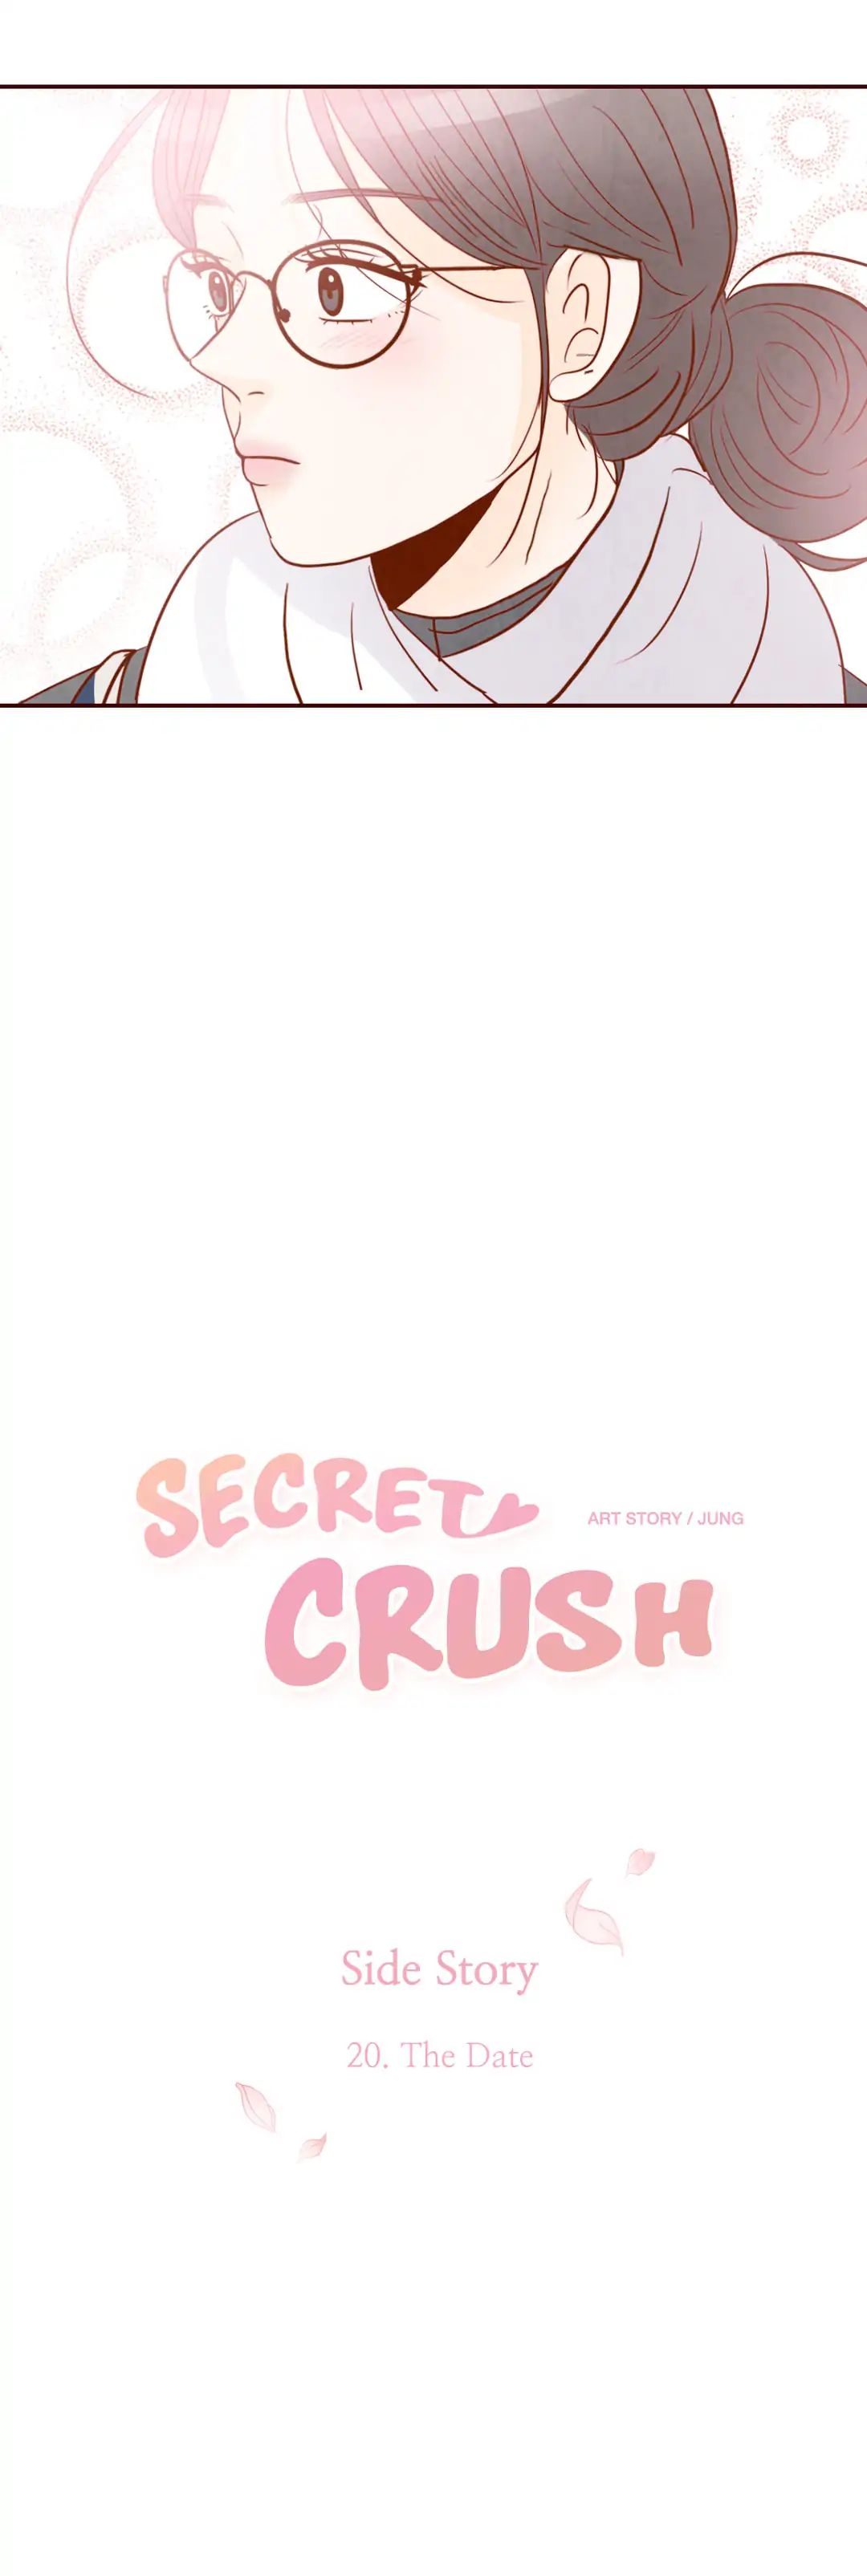 Secret Crush Side Story: The Date - Picture 2